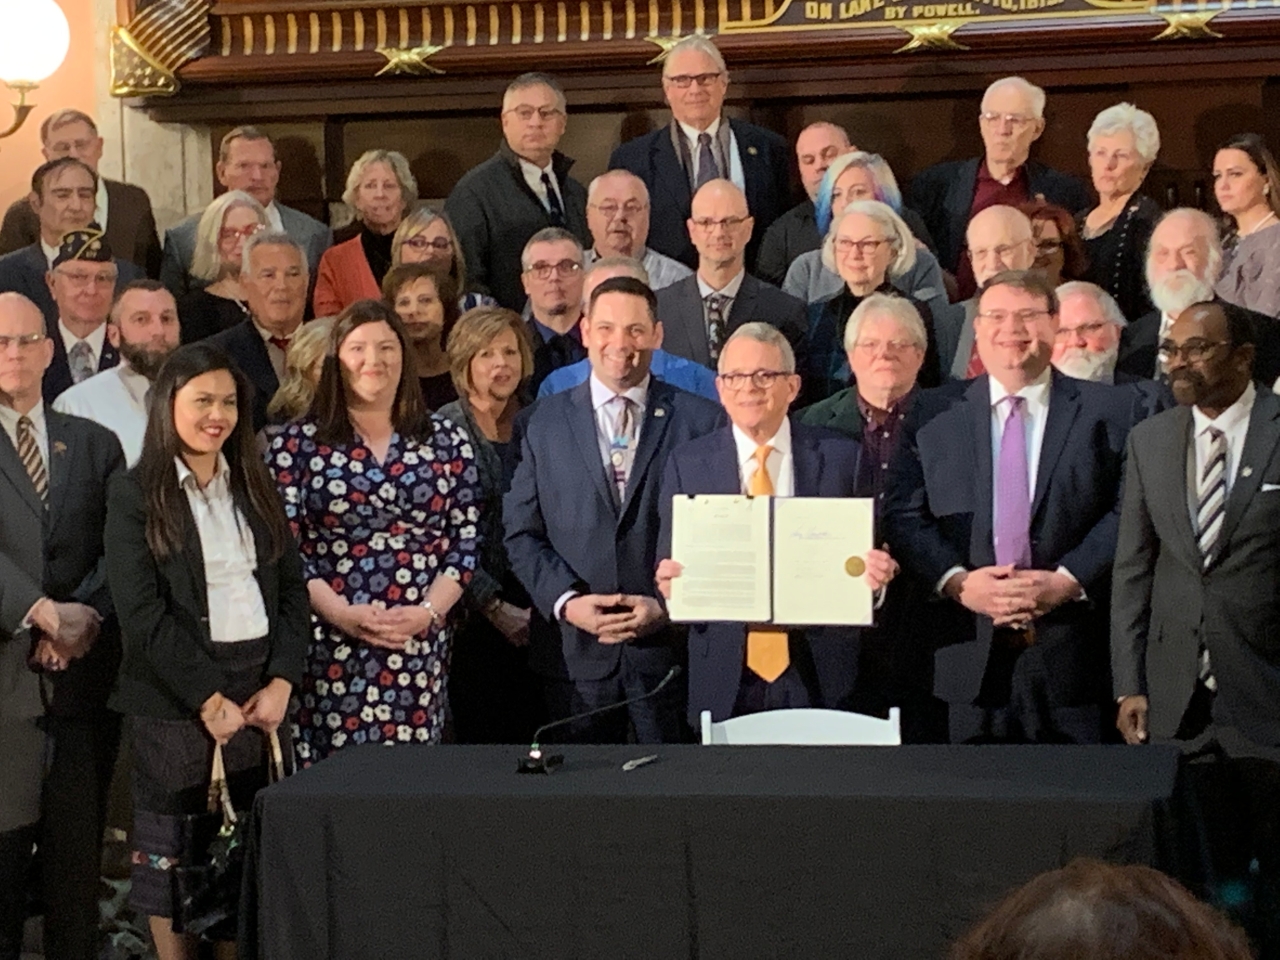 Lawmakers pose for a photo with Gov. DeWine for a bill signing